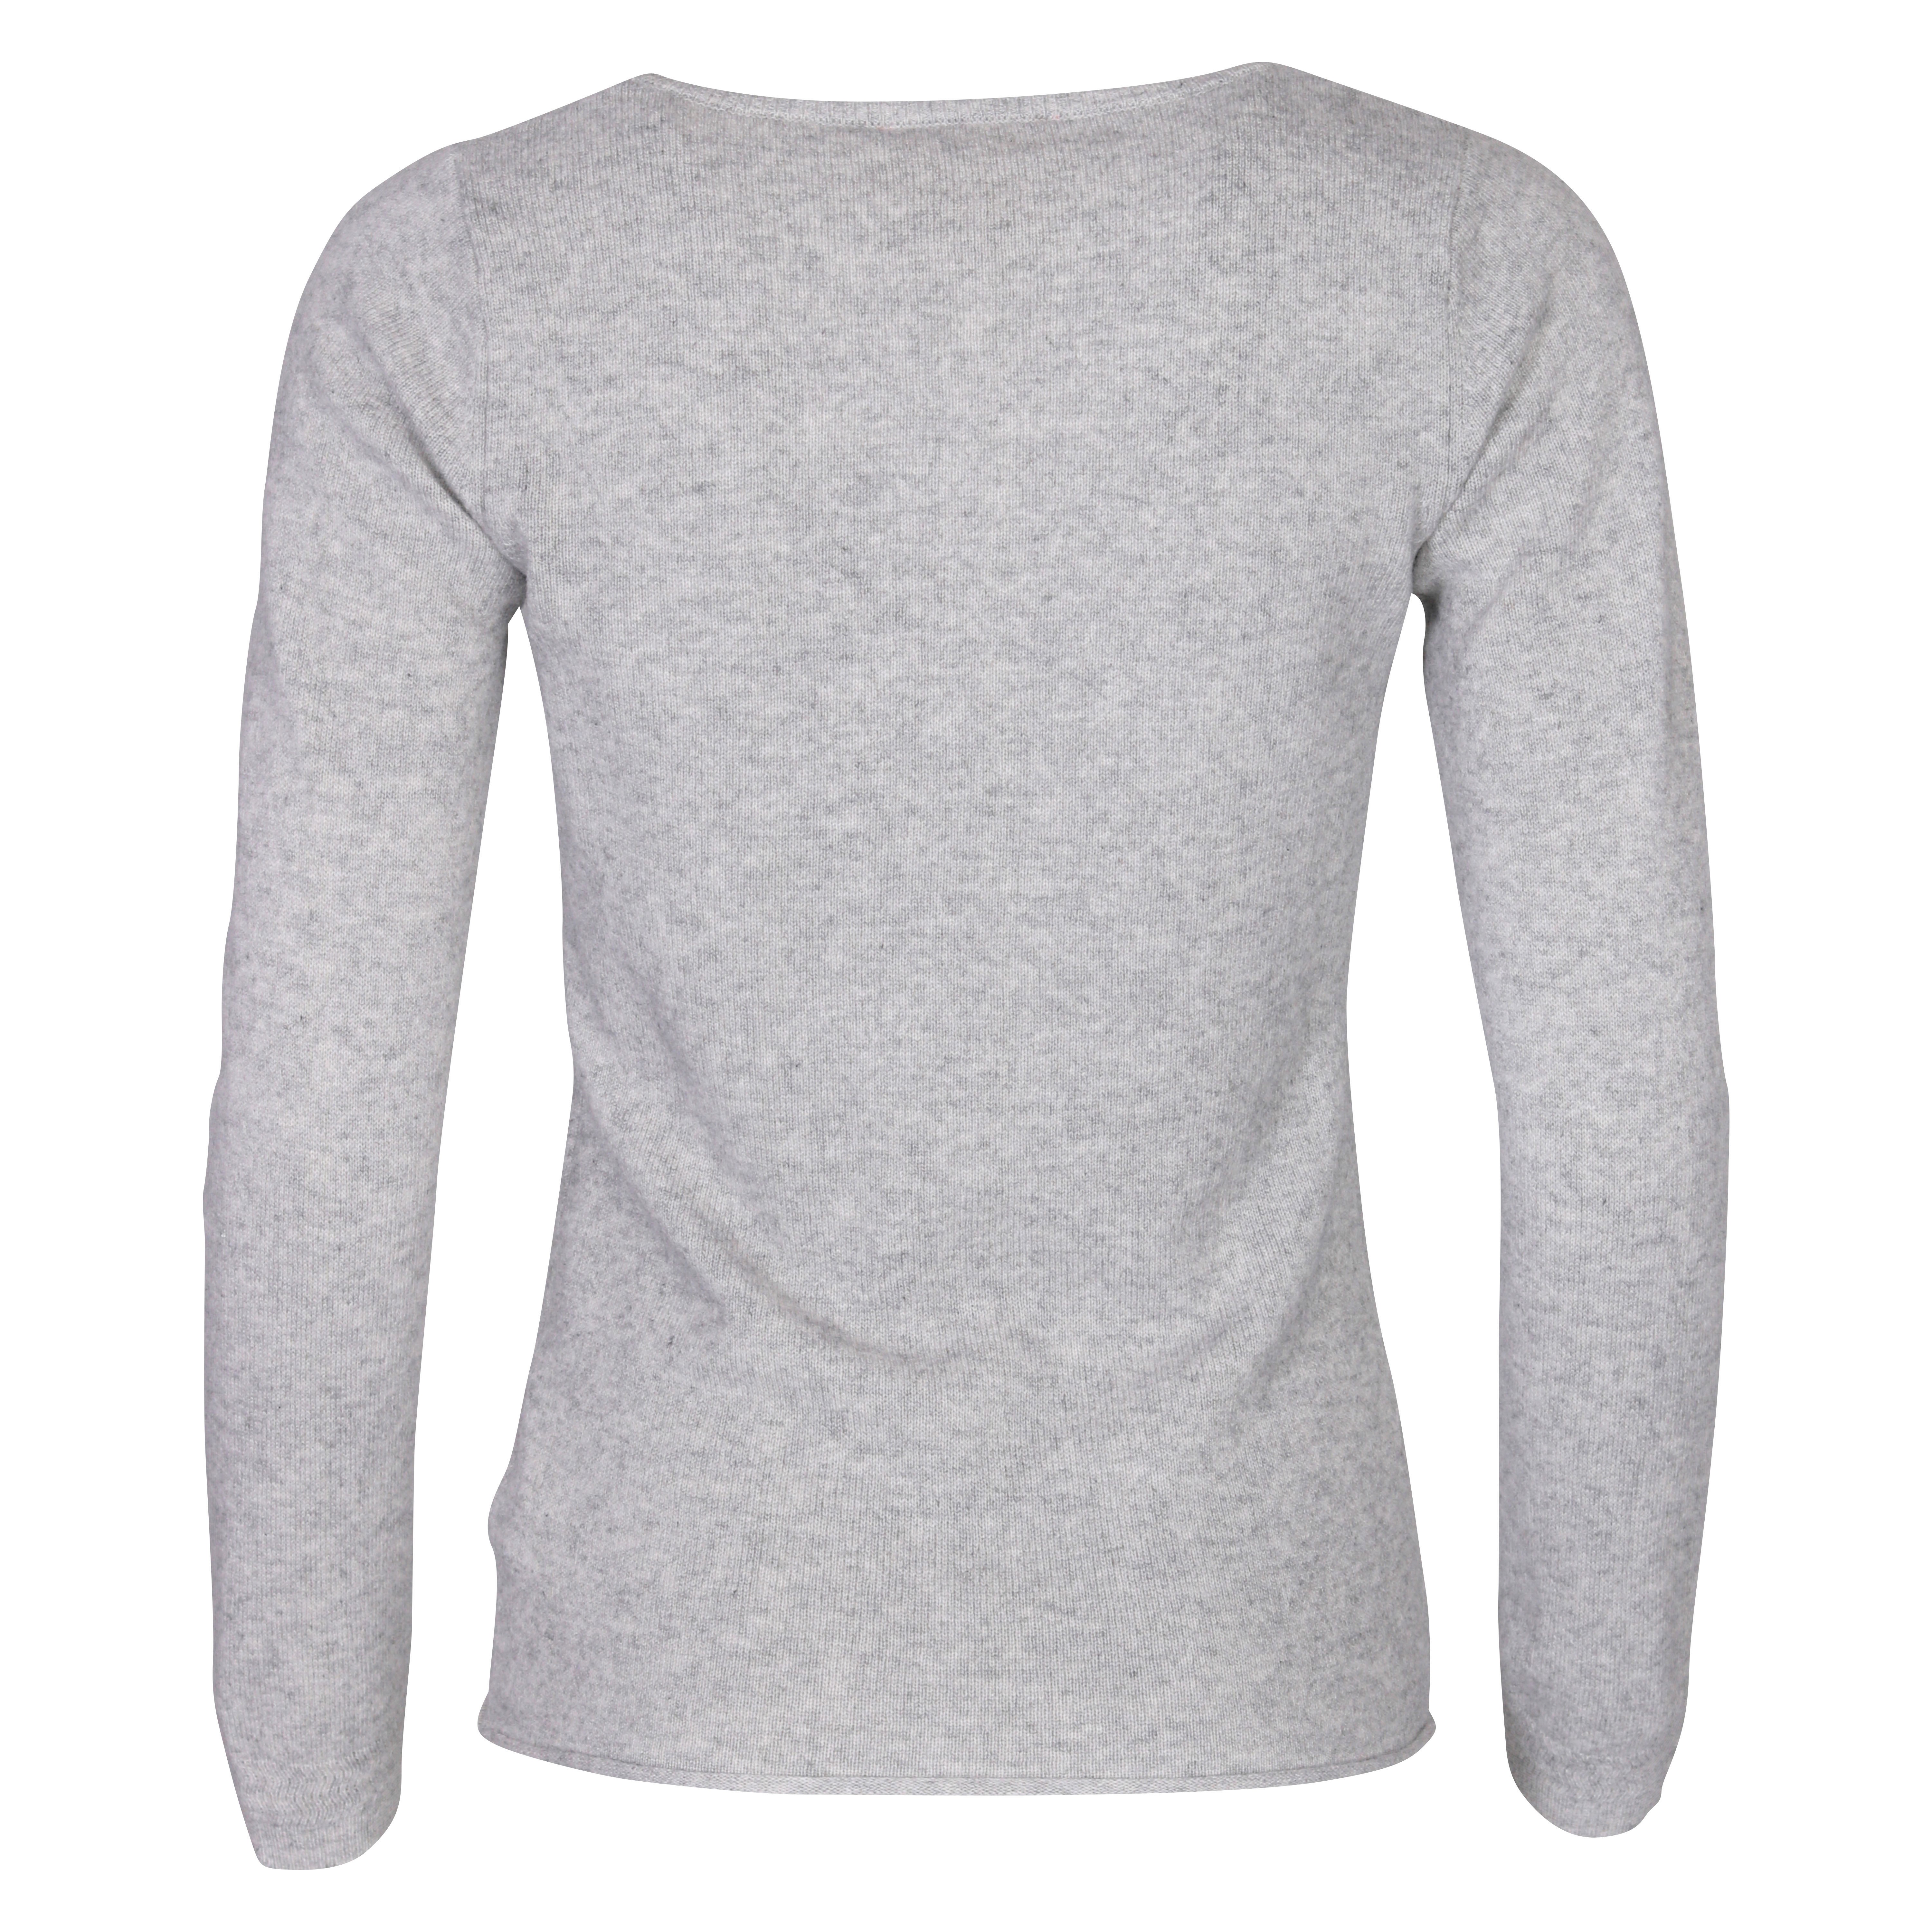 Absolut Cashmere Fitted V-Neck Sweater in Heathergrey M